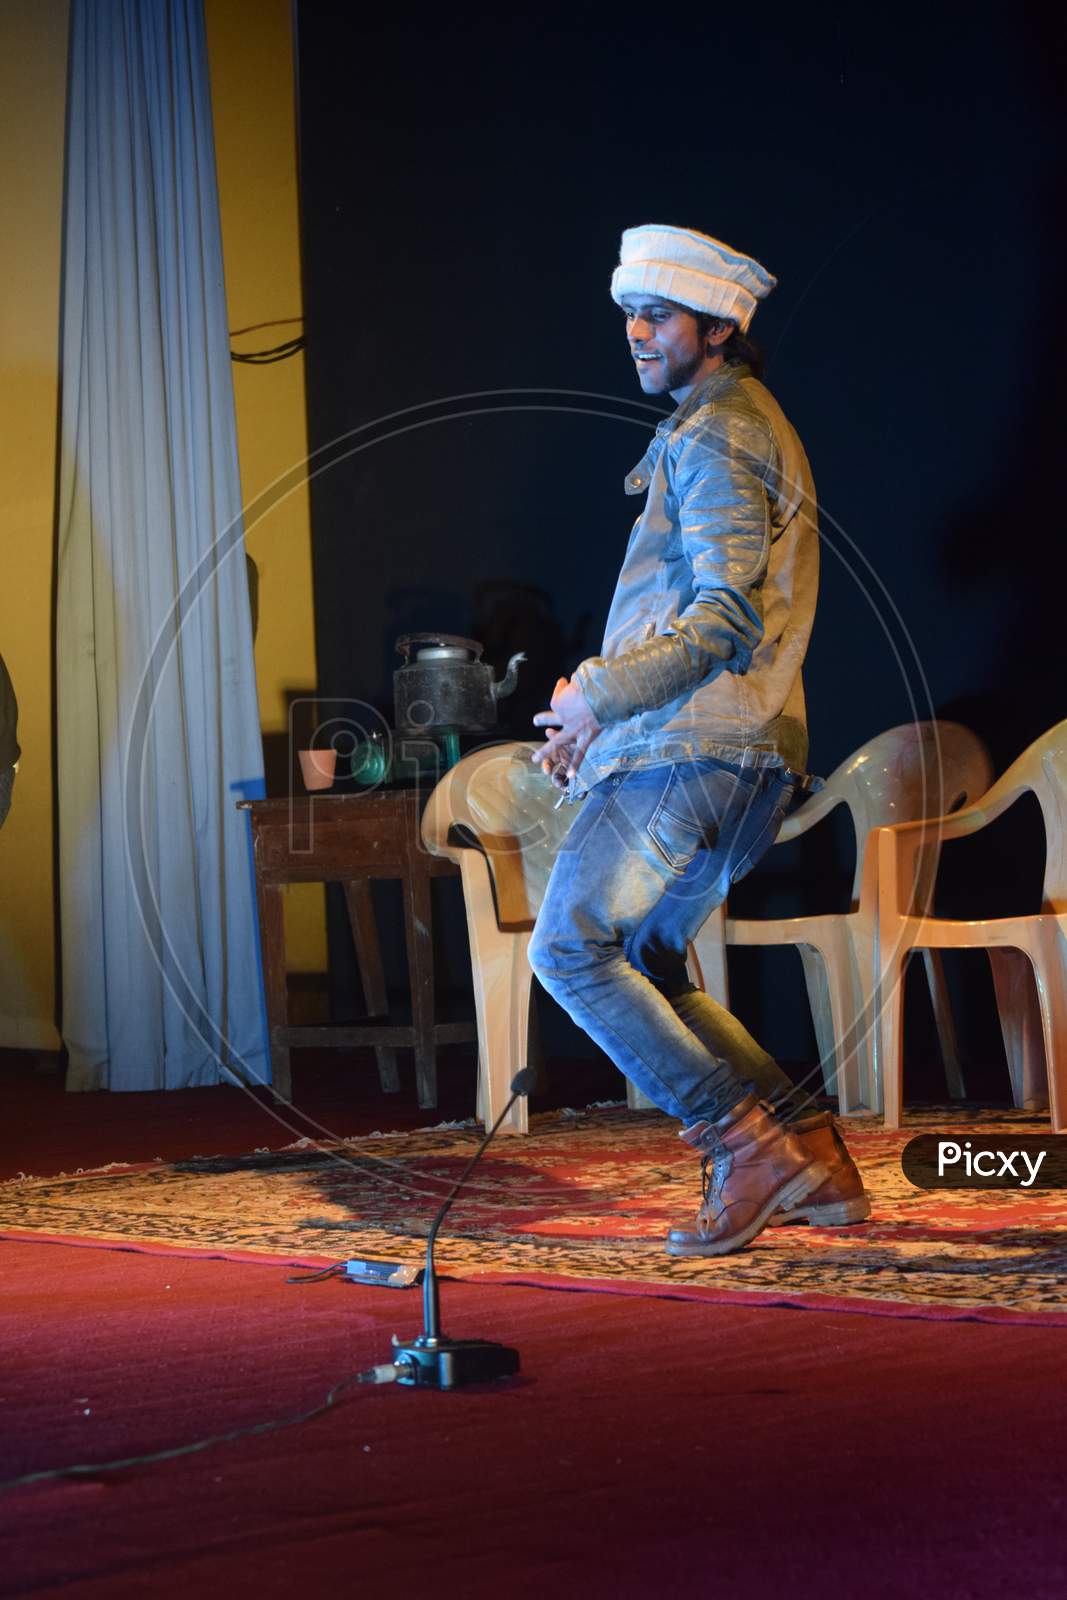 Arts College Students  Performing Skit Or Stage Show During an College Event  On Burning Issues In India